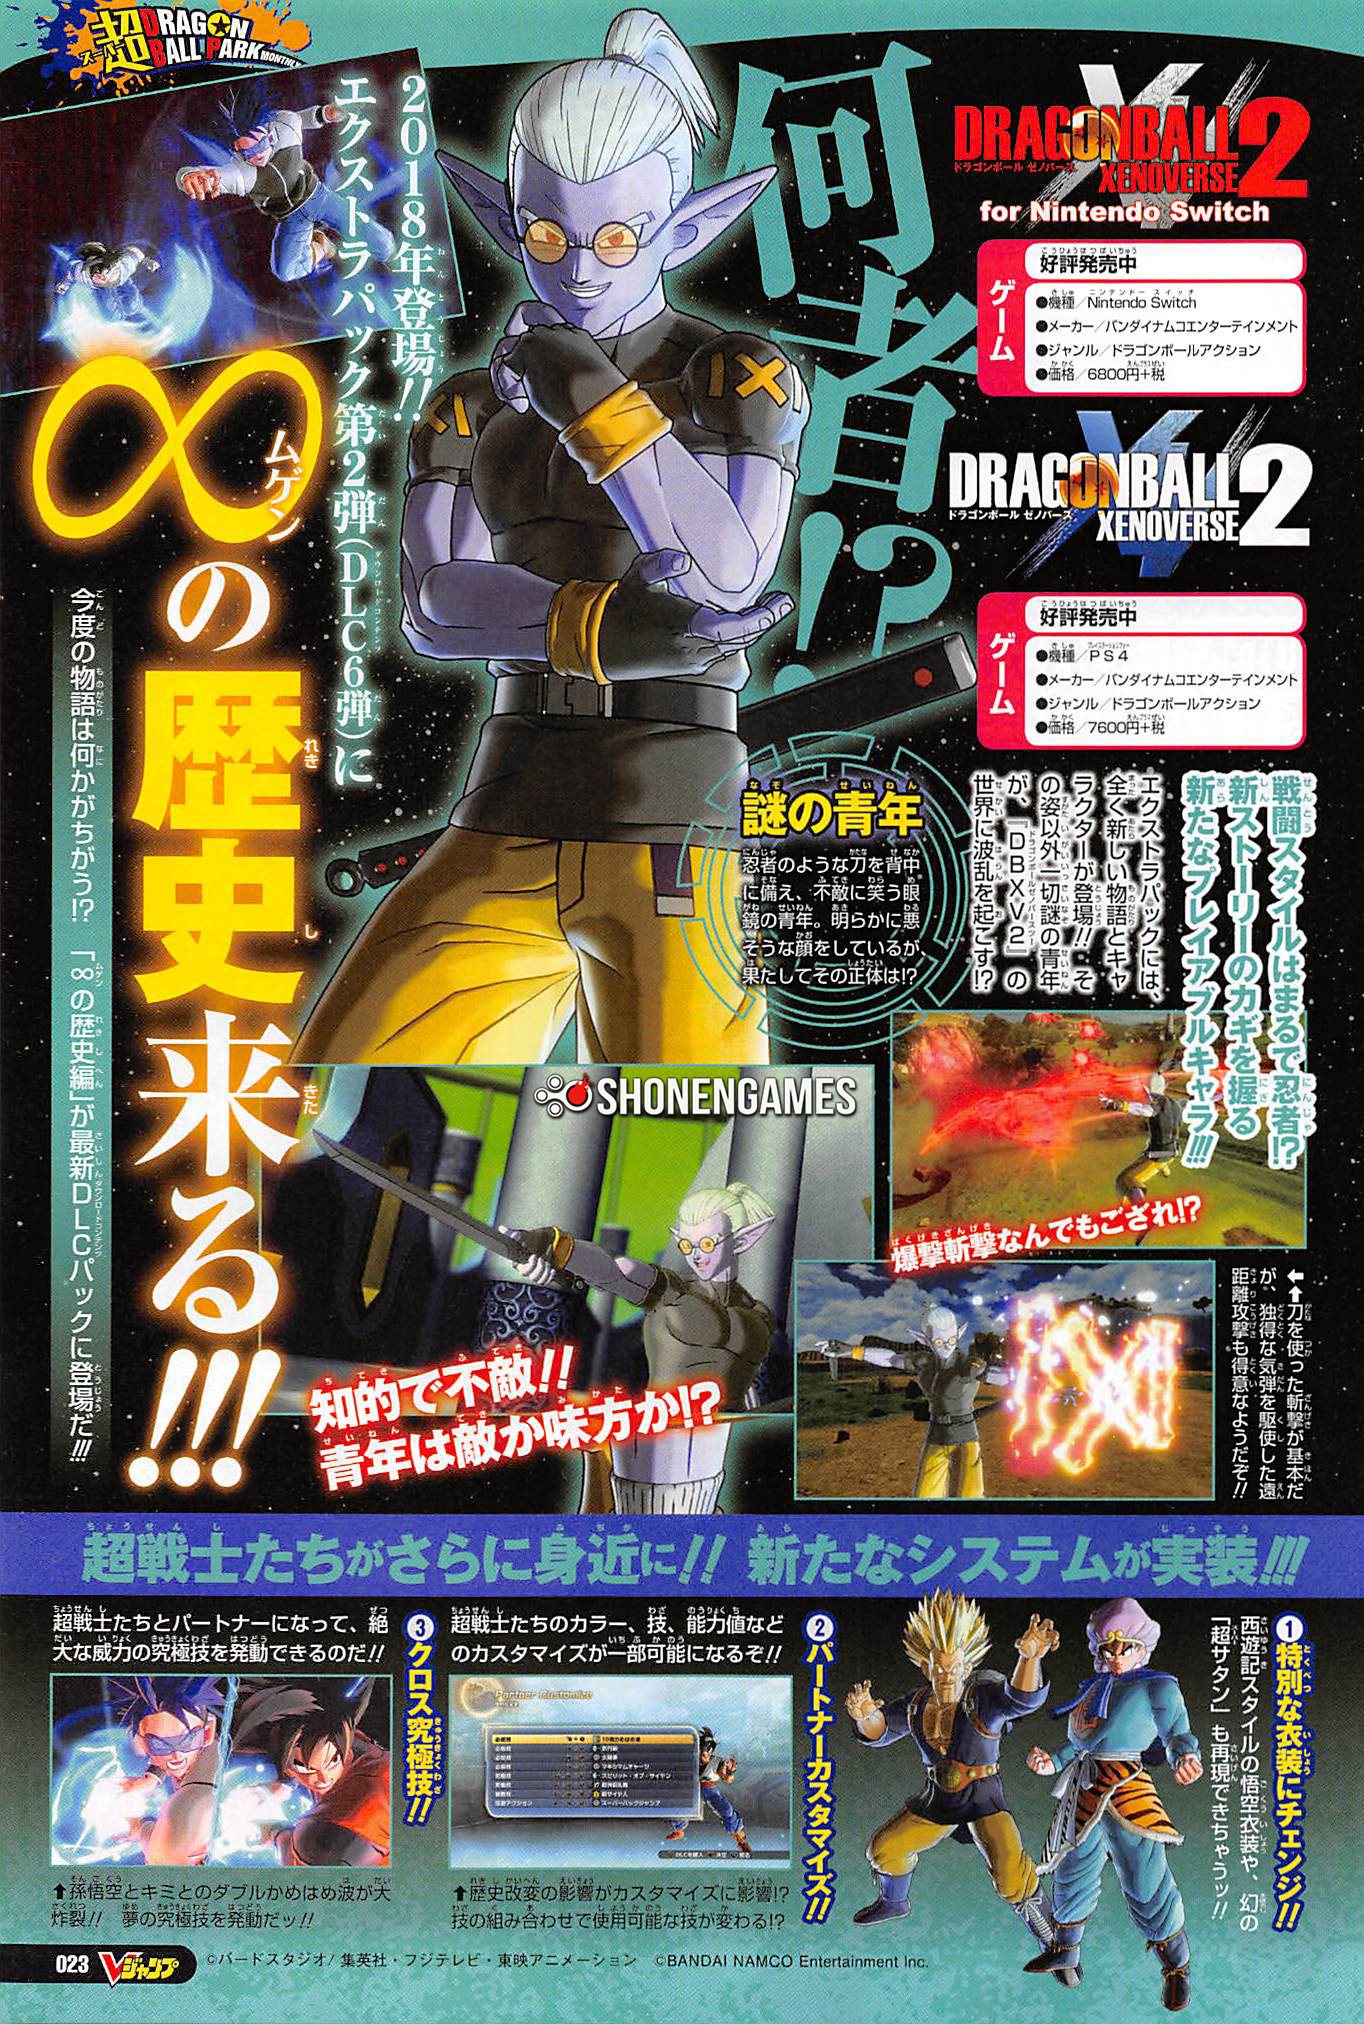 Dragon Ball Xenoverse 2 A new mysterious character and